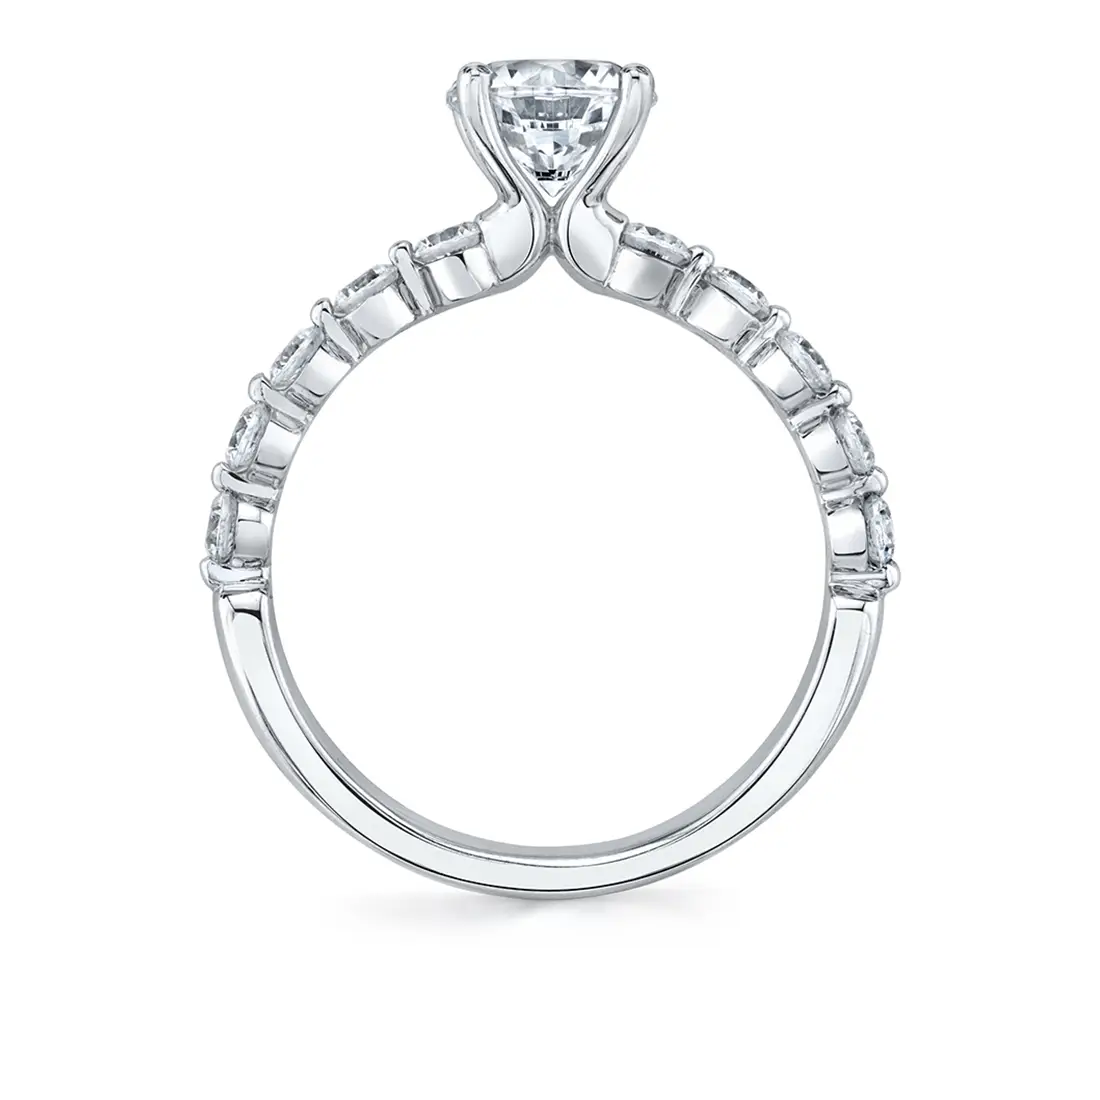 Profile Image of a Single Prong Engagement Ring in white gold 